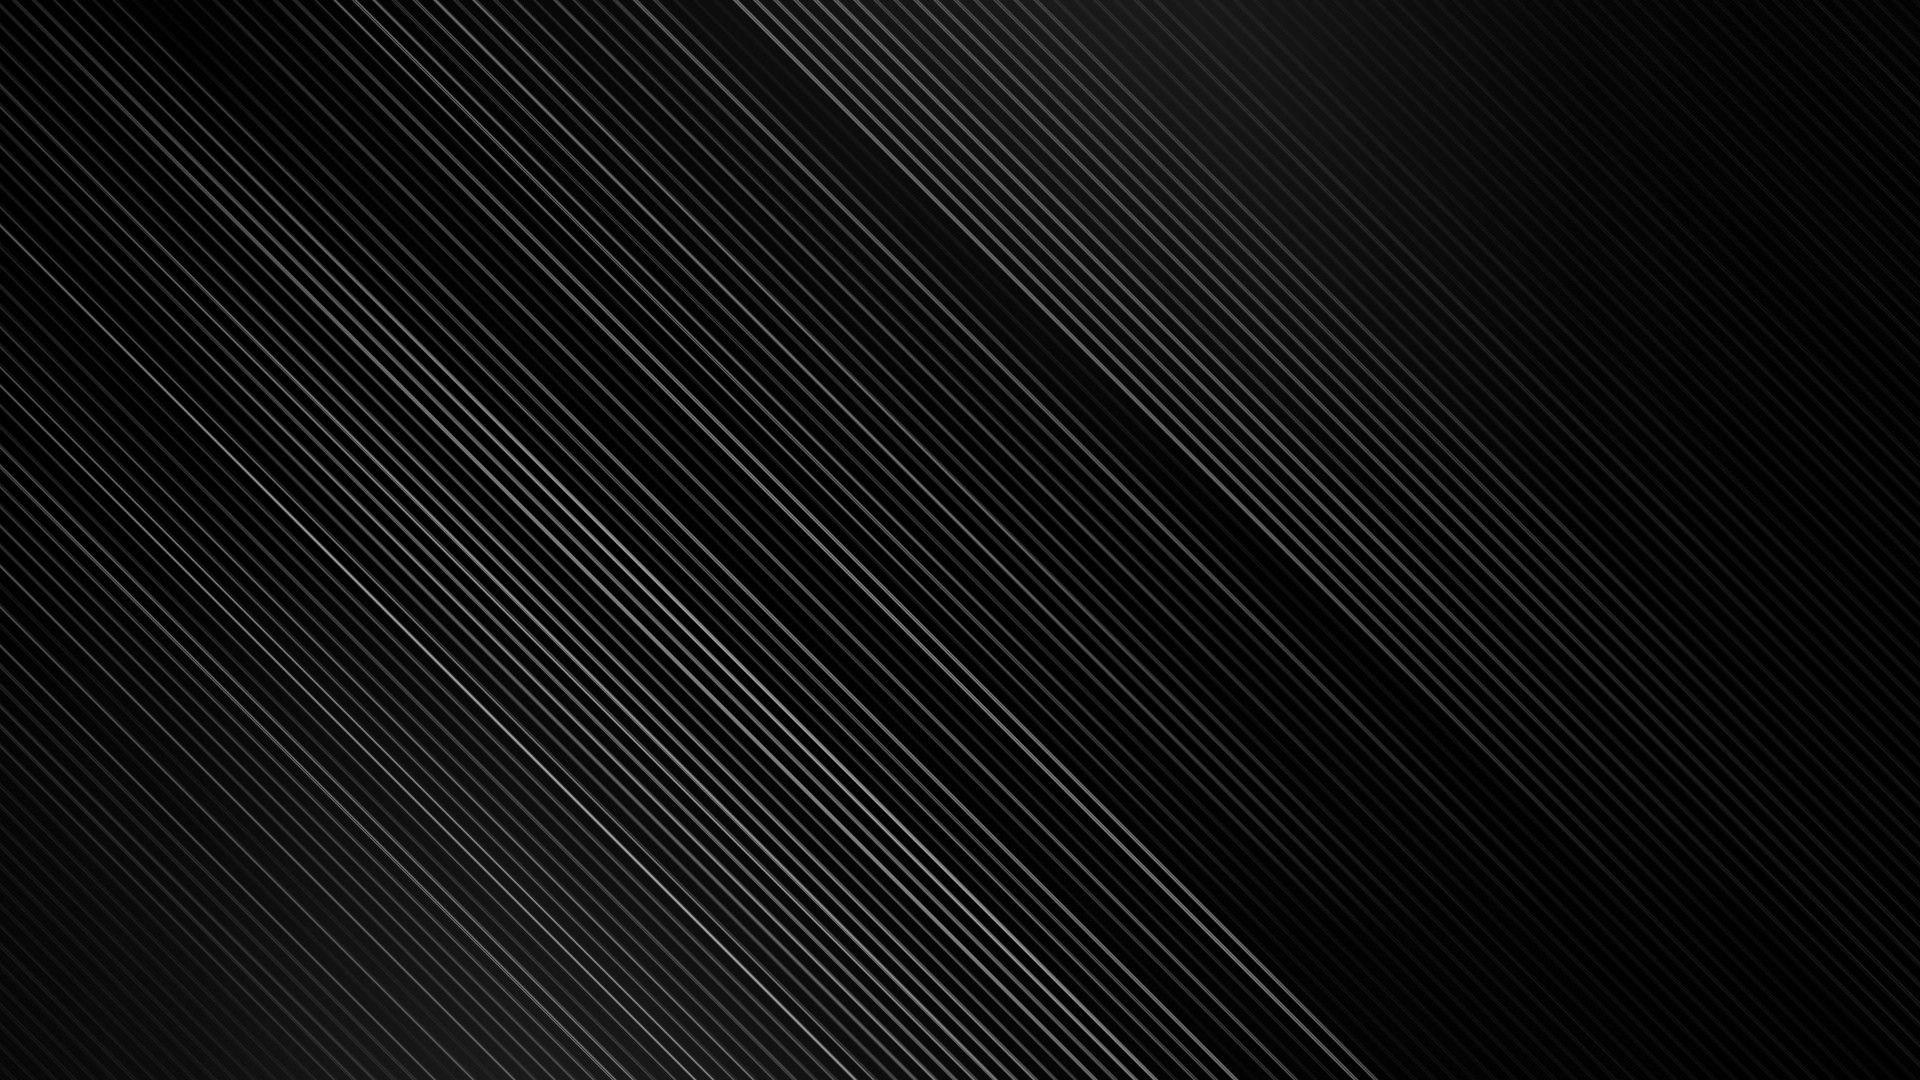 Minimalist Black And White Wallpapers Top Free Minimalist Black And White Backgrounds Wallpaperaccess